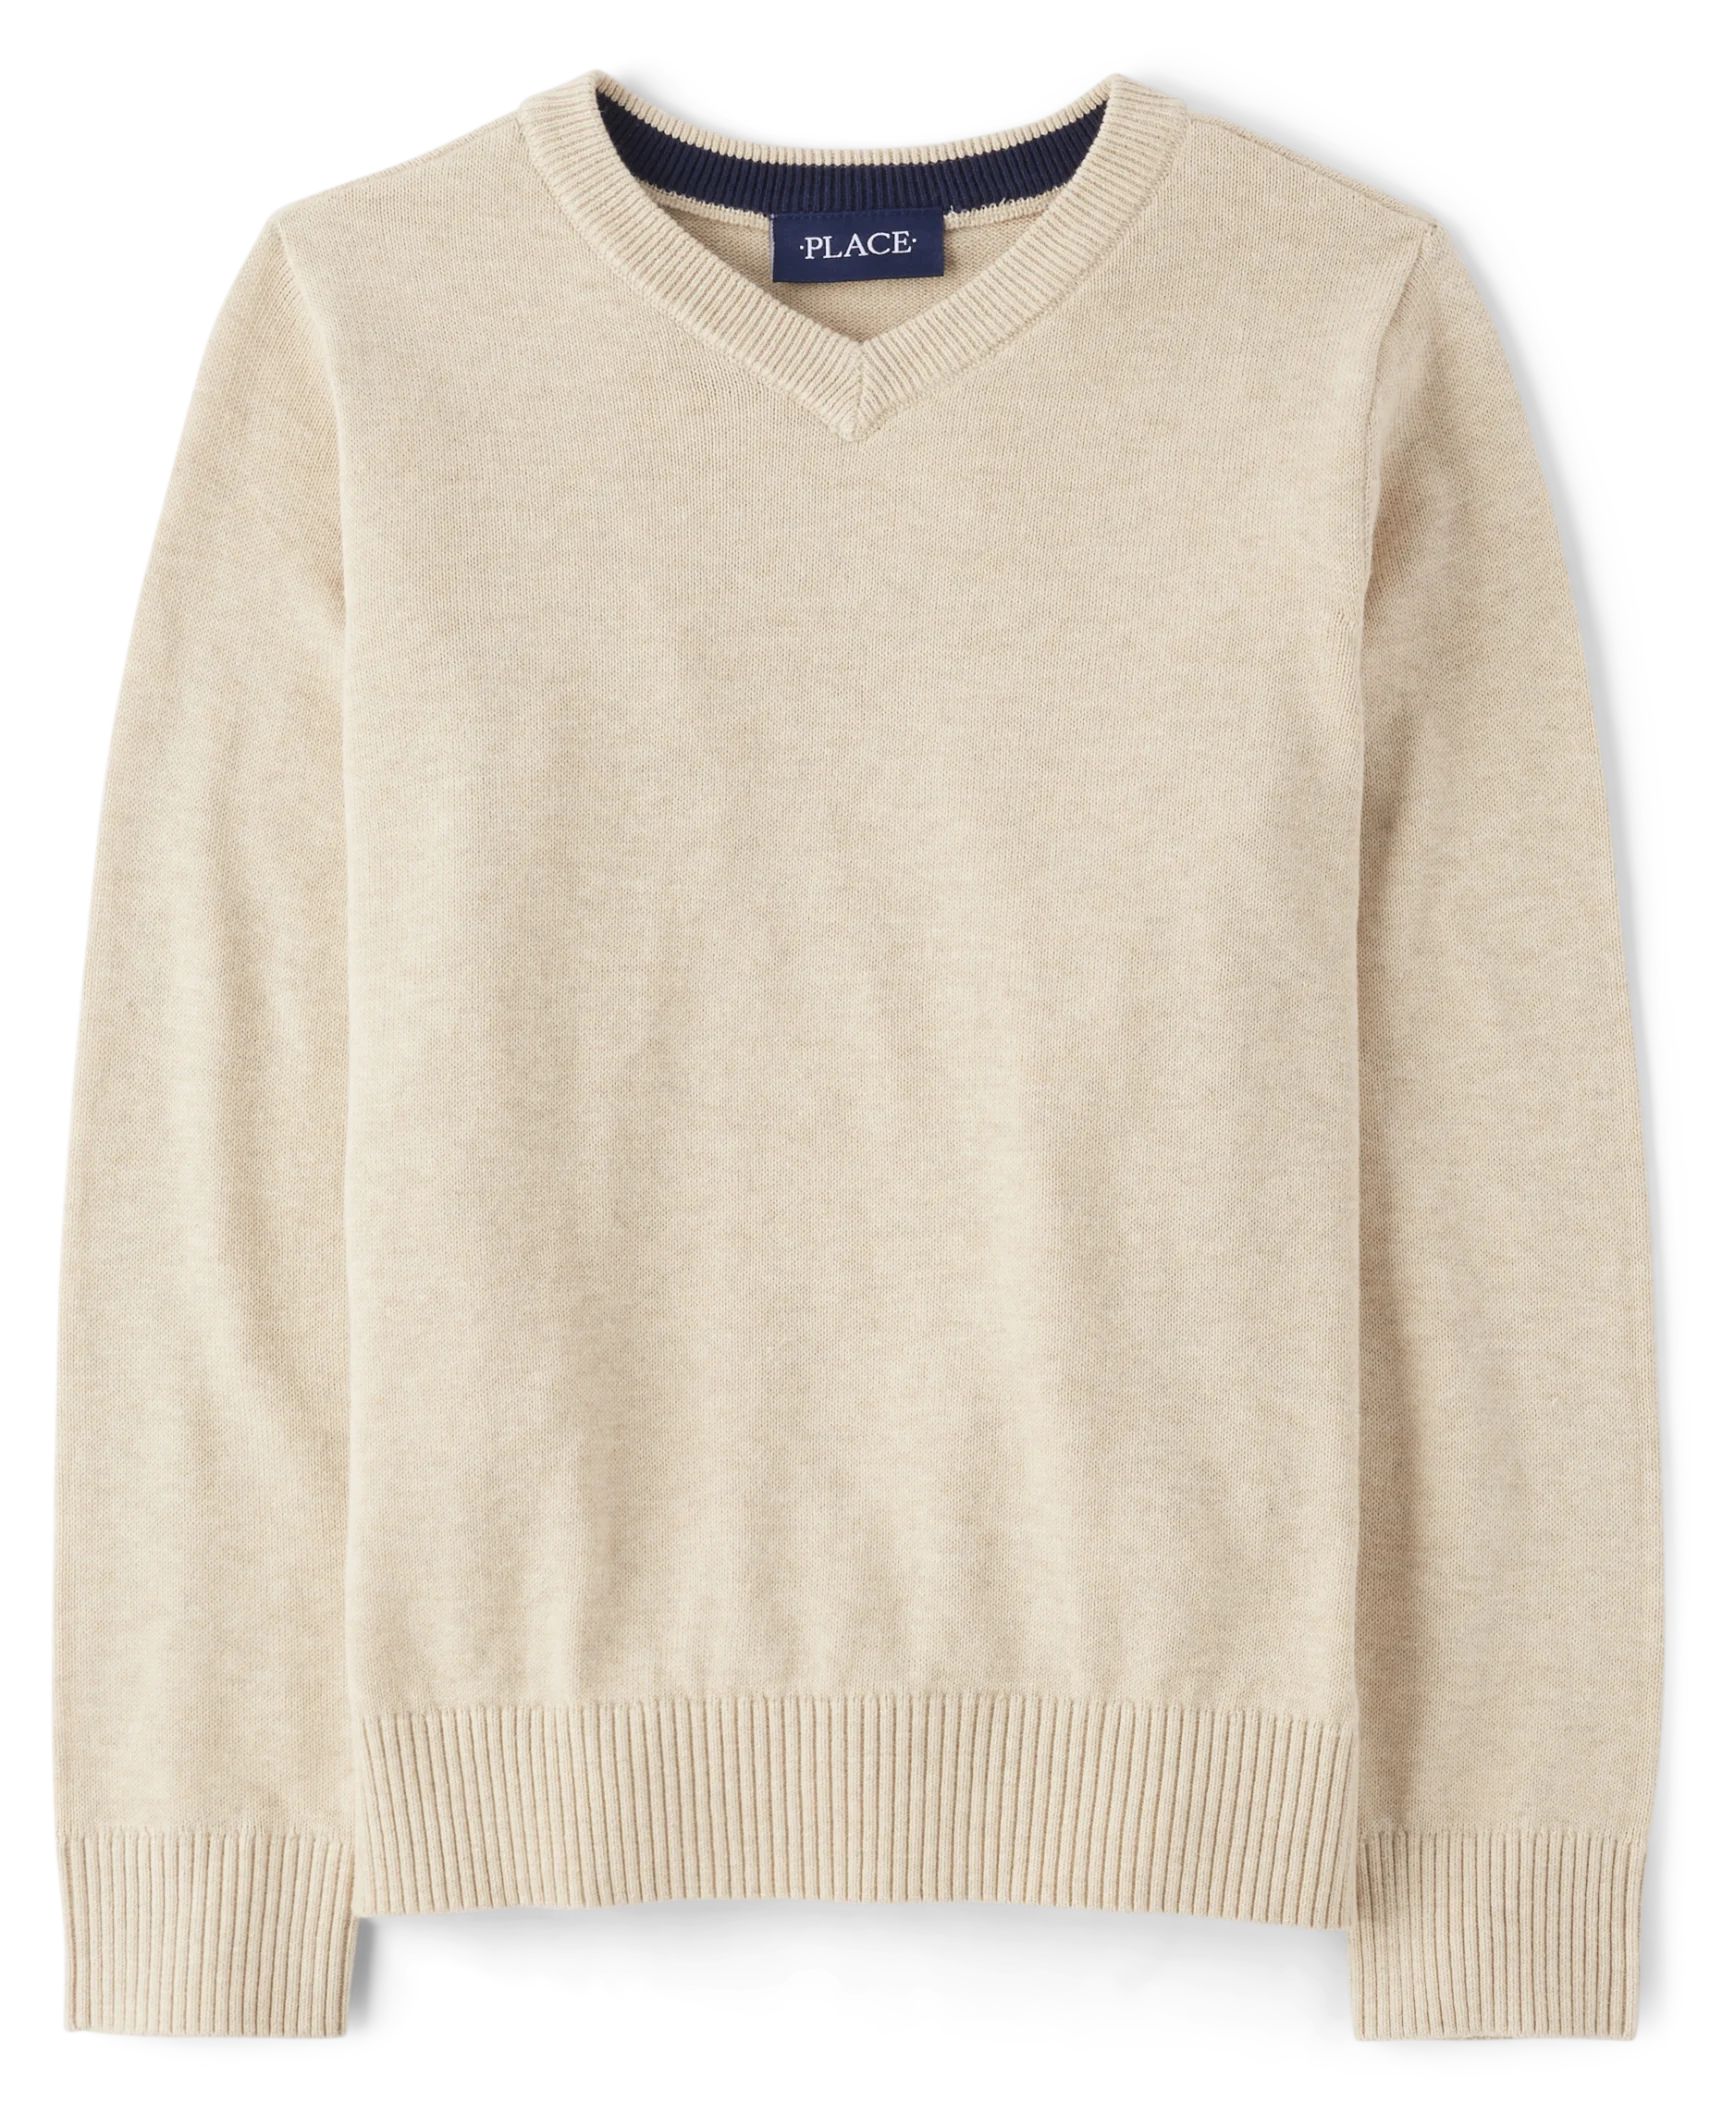 Boys V Neck Sweater - h/t straw | The Children's Place